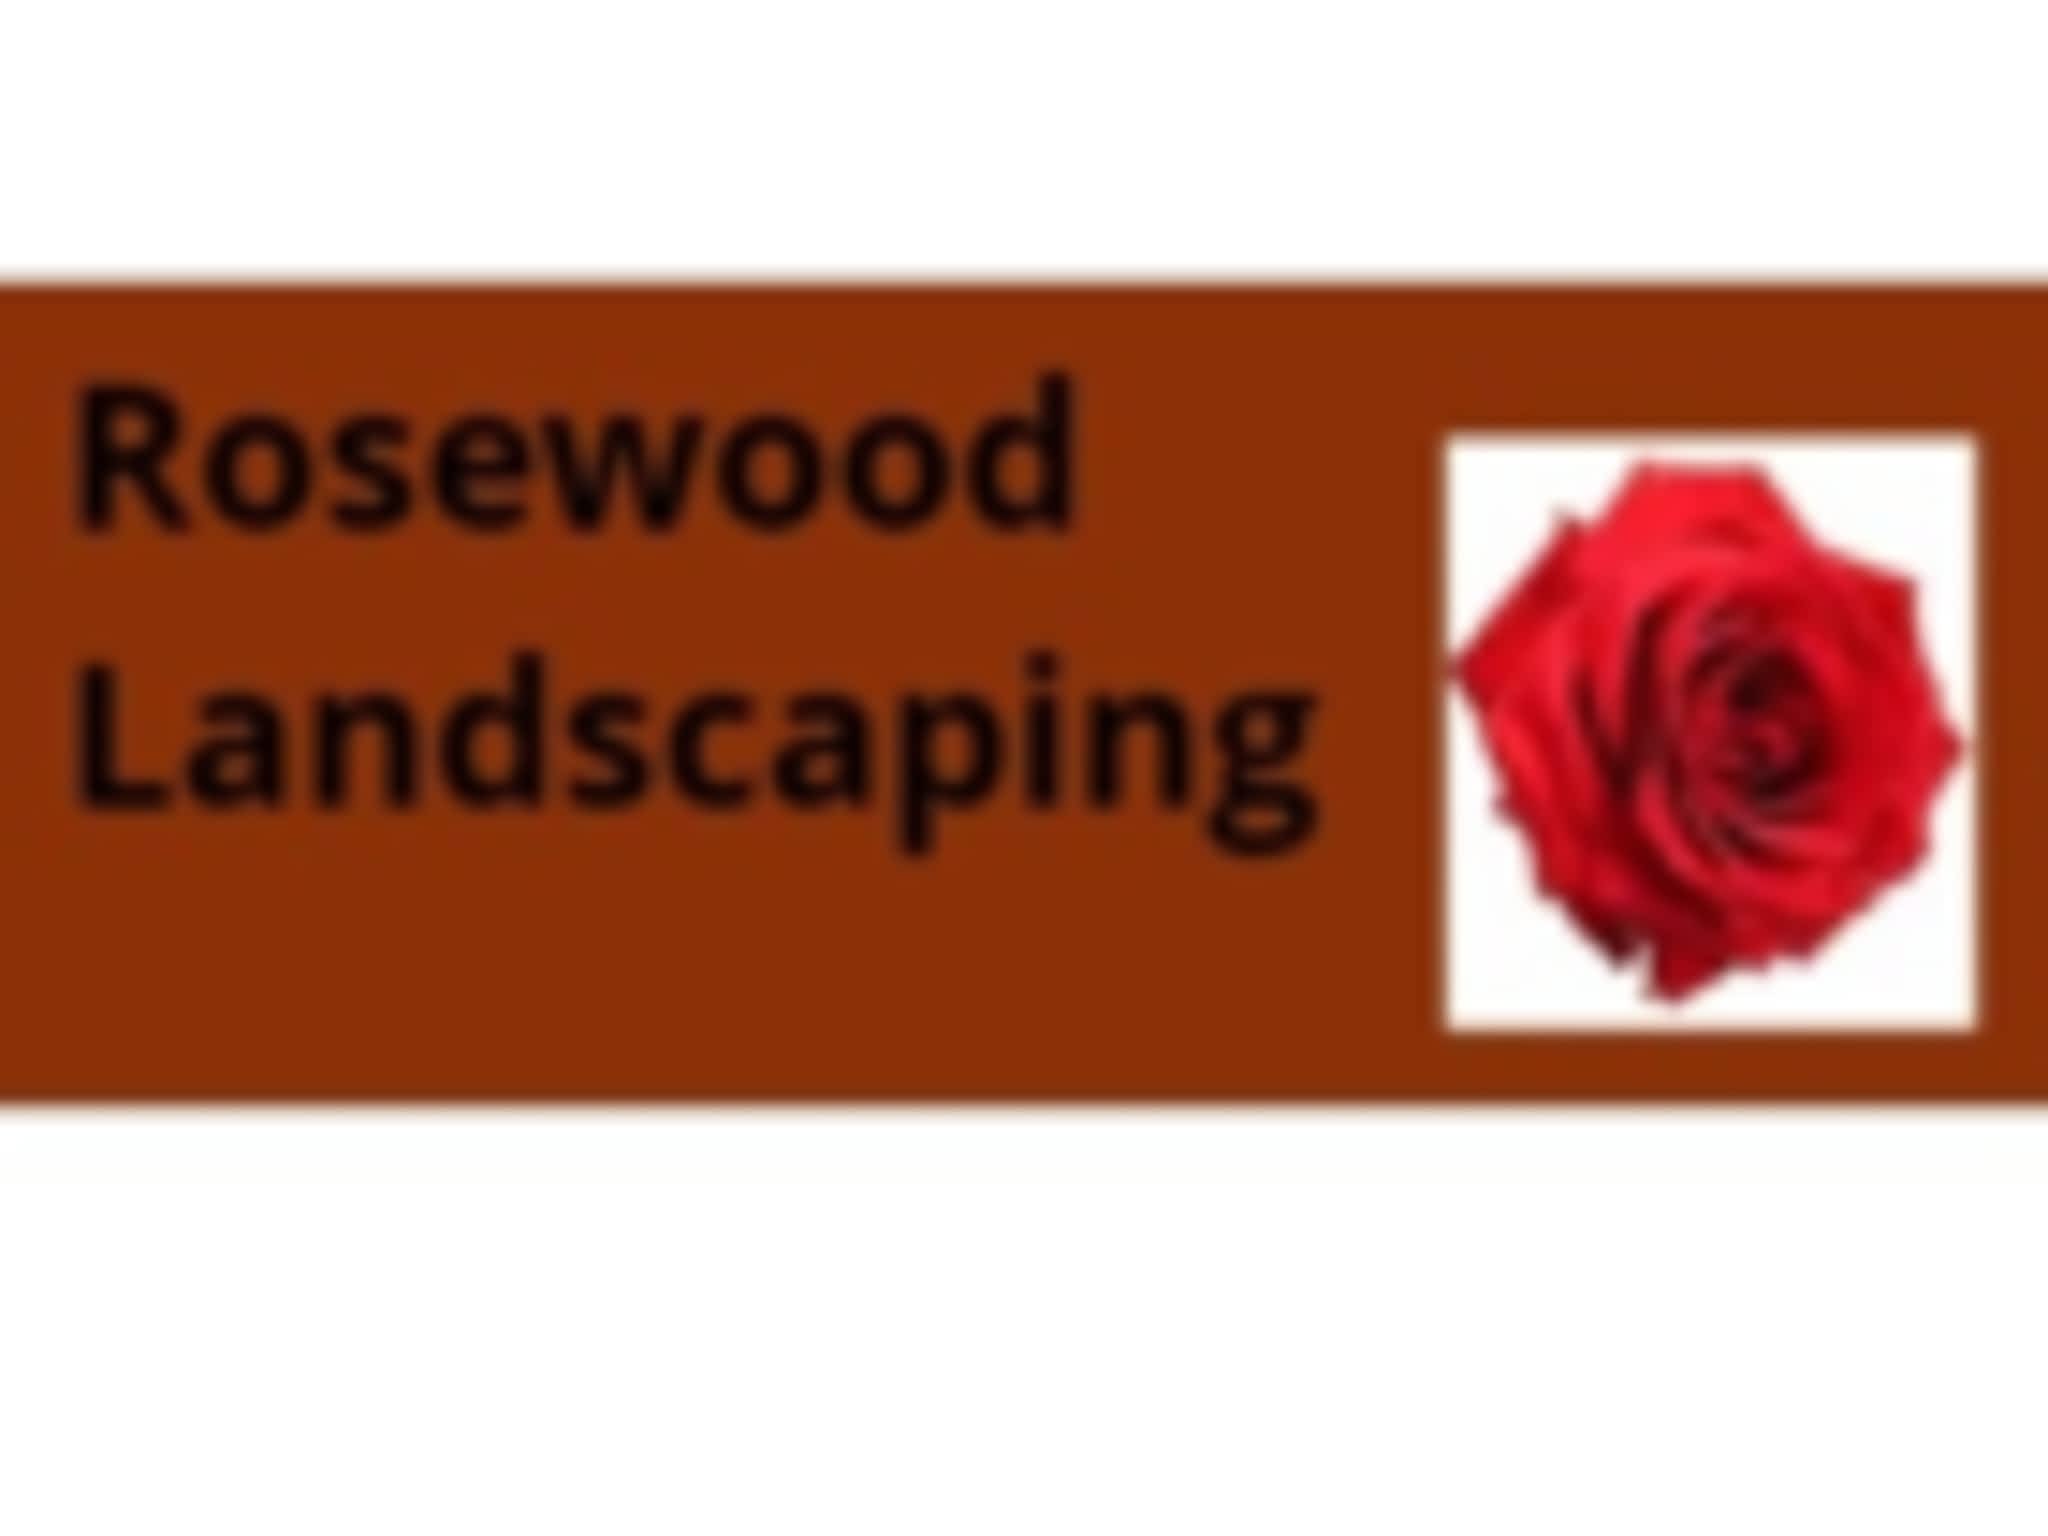 photo Rosewood Landscaping